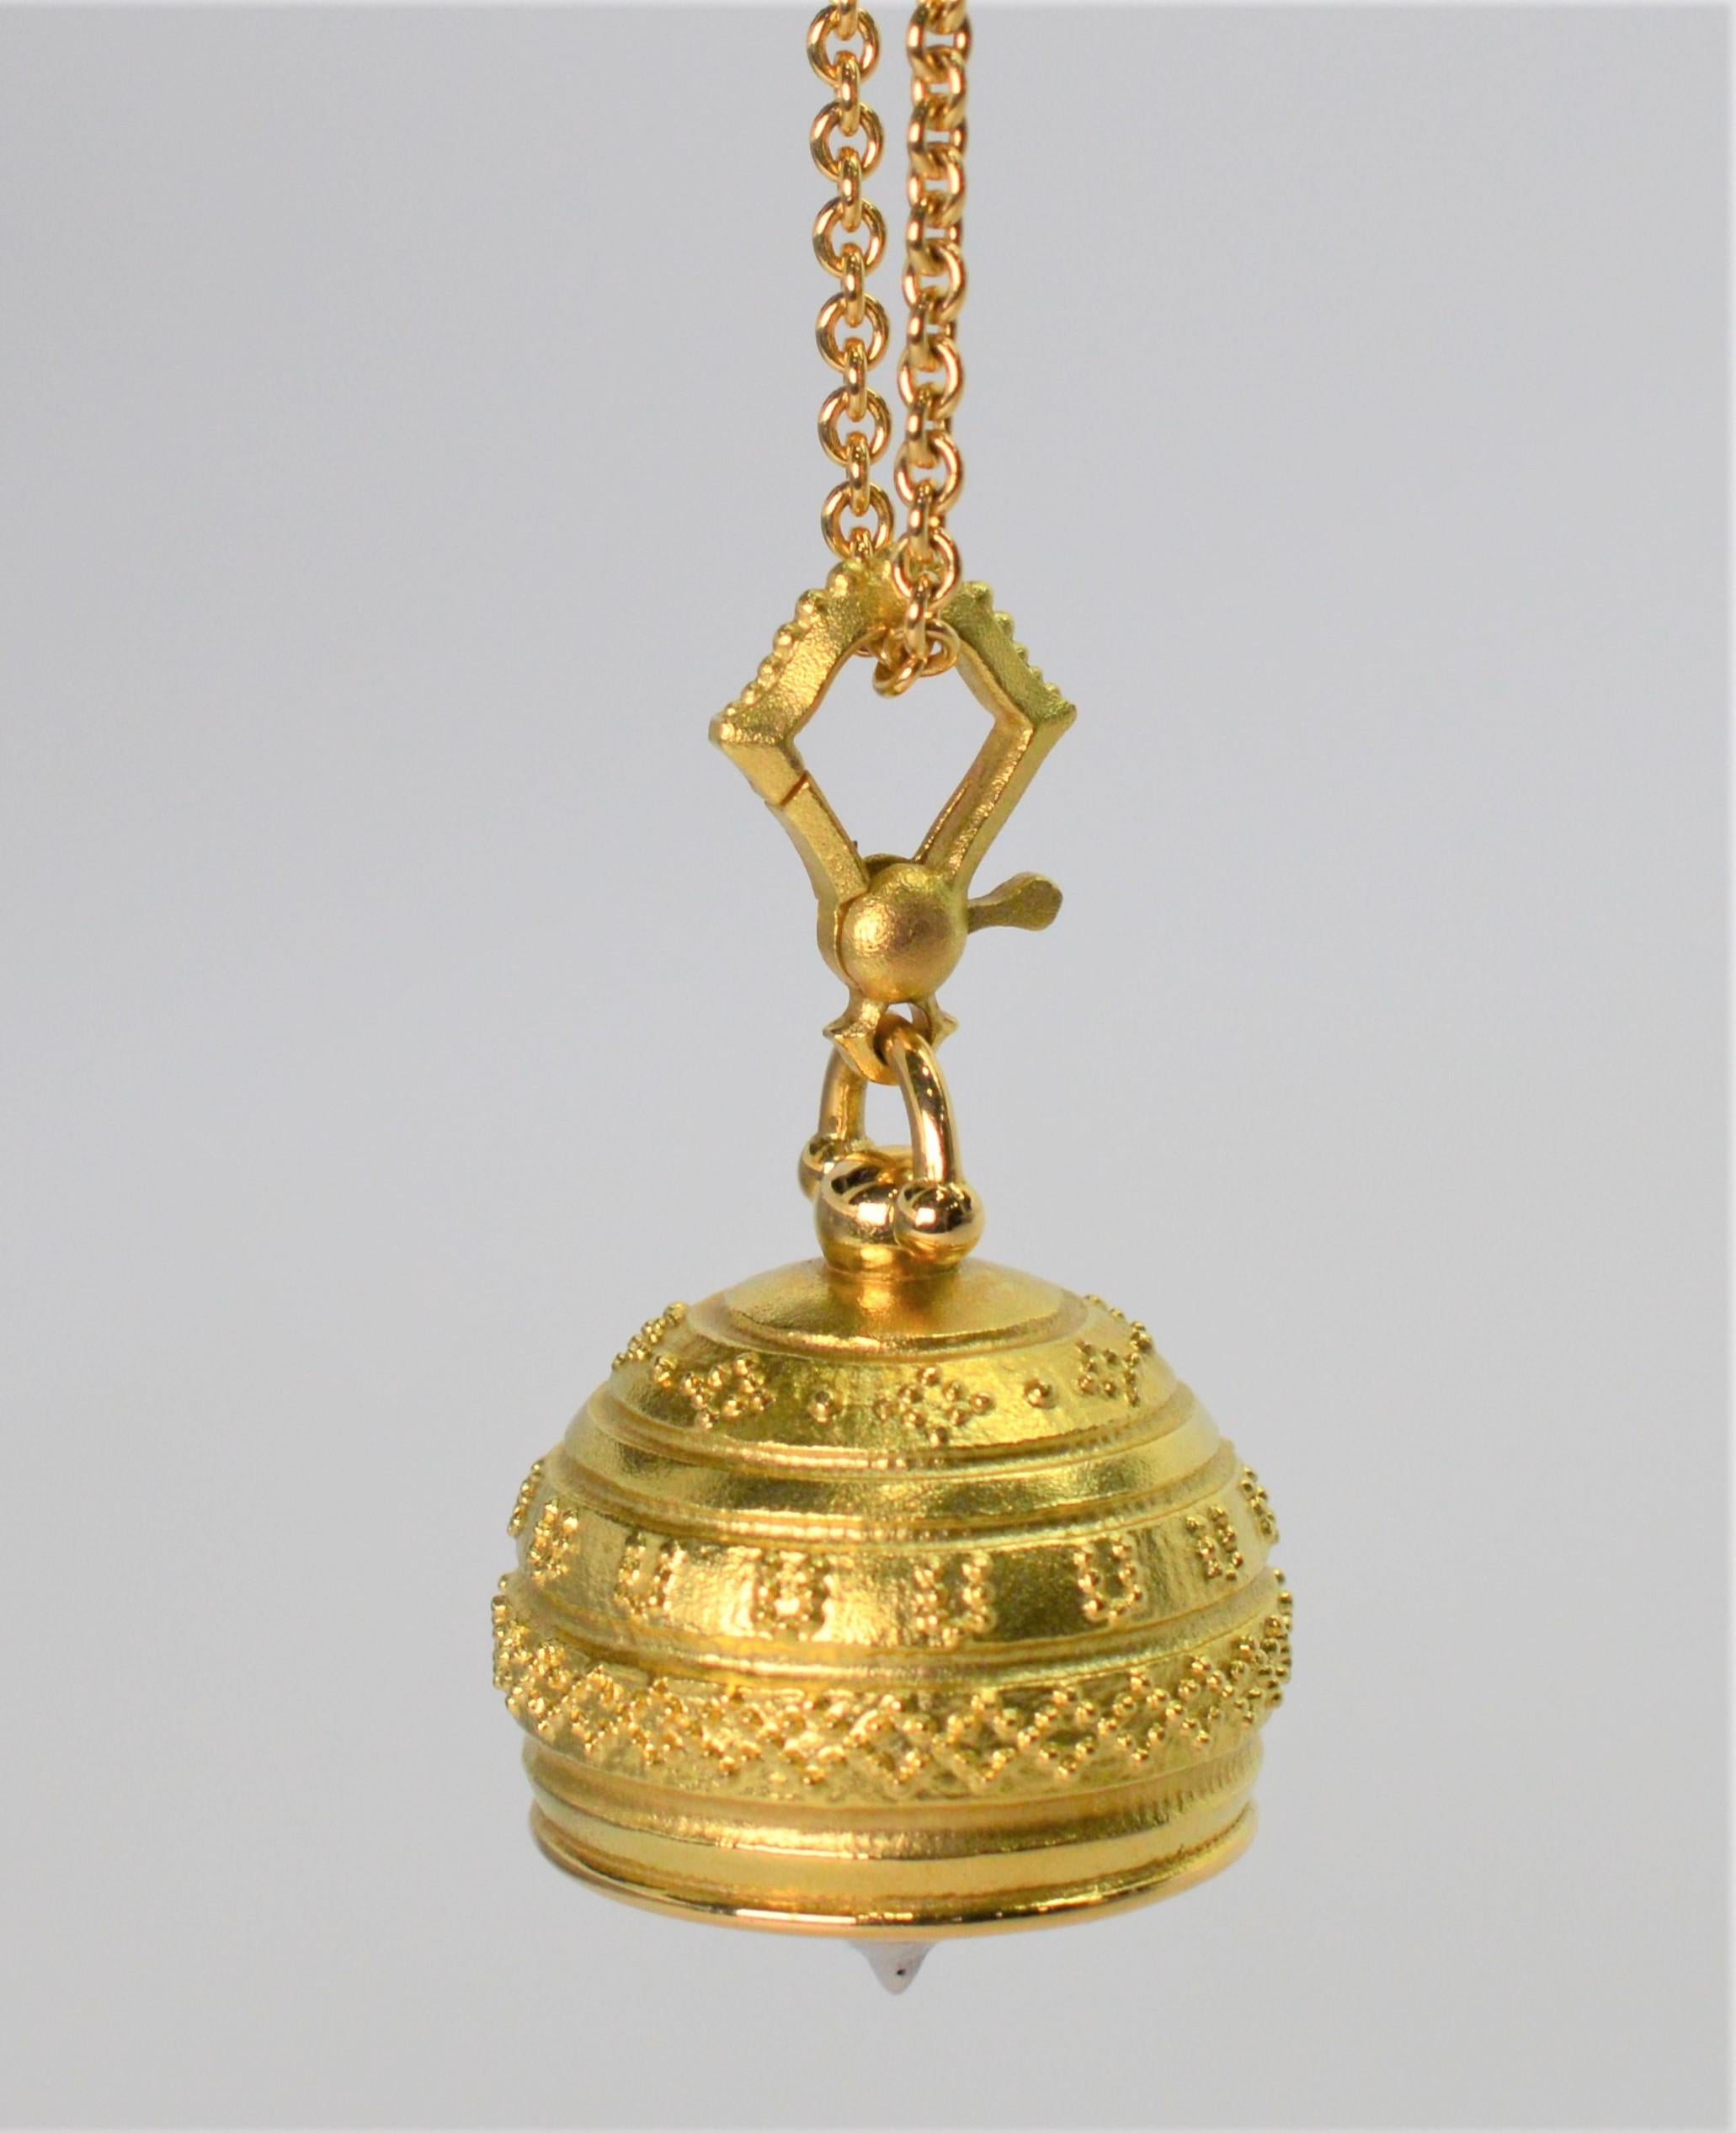 A soft, whimsical tone reverberates from this meditation bell charm in eighteen karat yellow gold by Paul Morelli. 
The charm measures approximately 3/4 x 3/4 inch and is outfitted with an enhancer clip.  
Suspended on a lengthy thirty inch eighteen